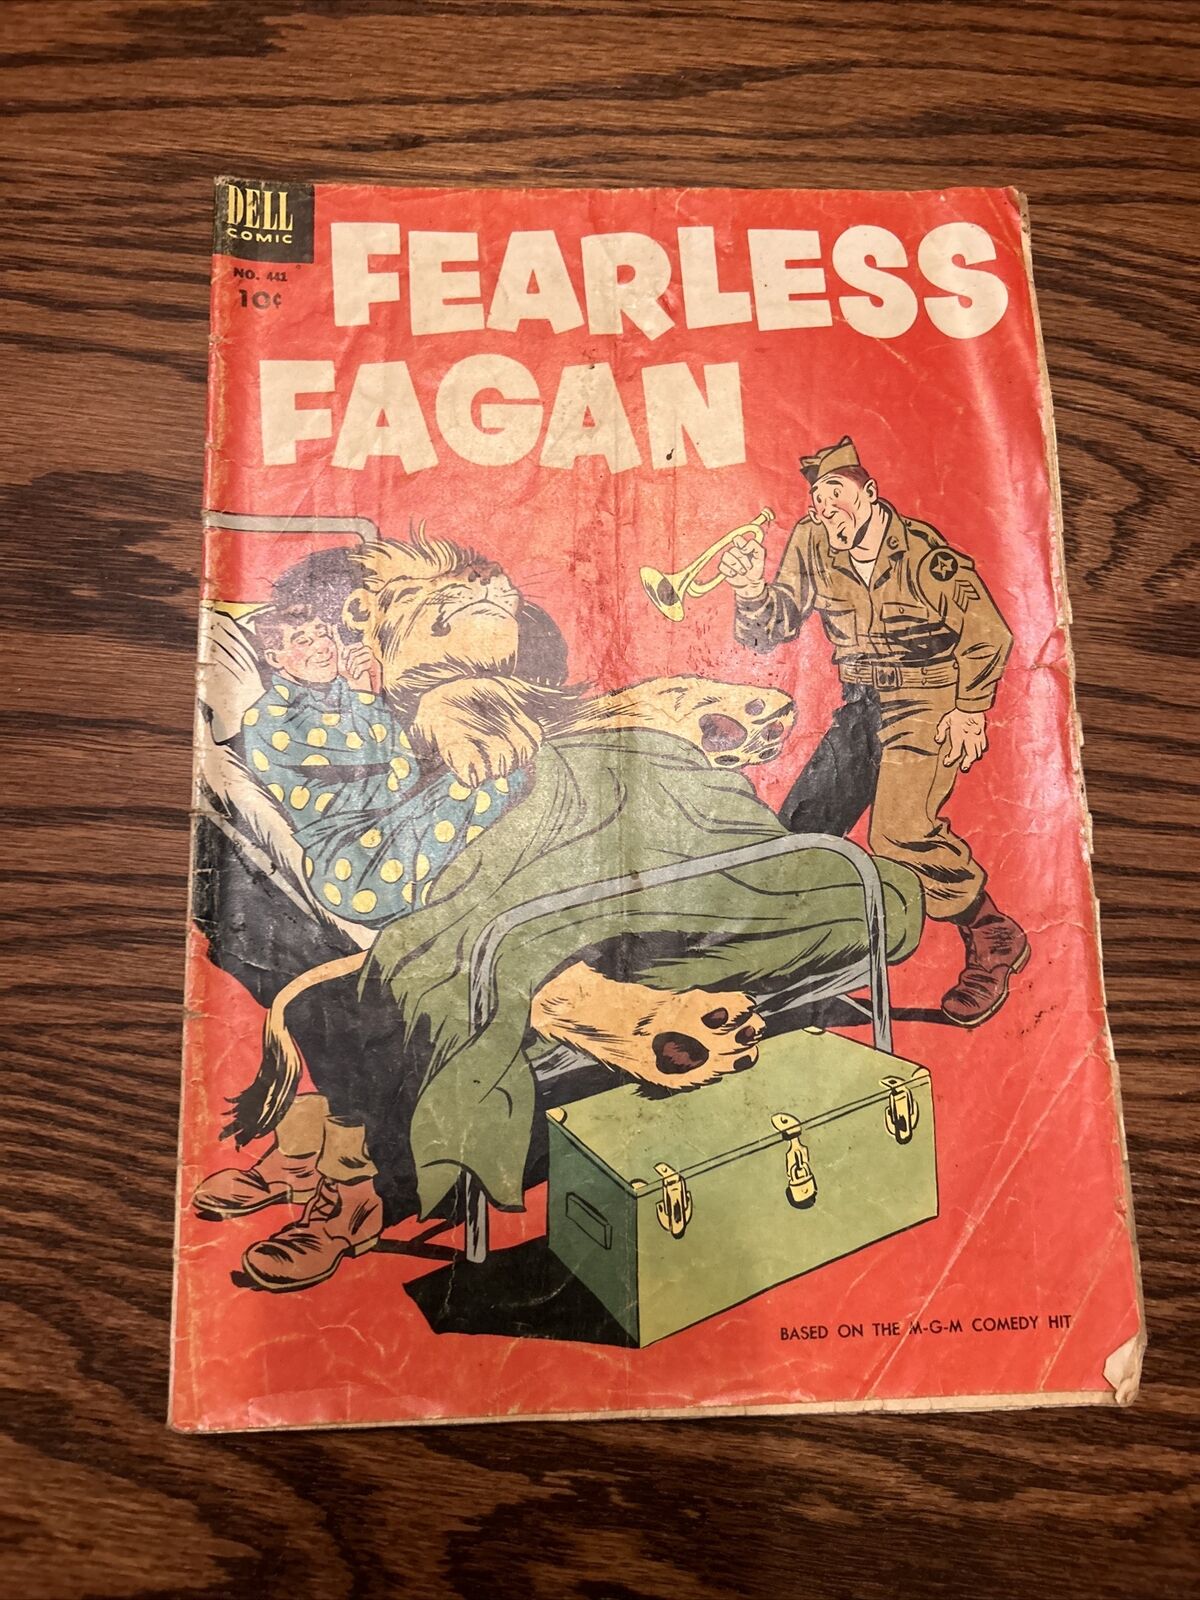 FOUR COLOR #441 FEARLESS FAGAN 1952 Dell Comics $0.10 Sleeping with lions.